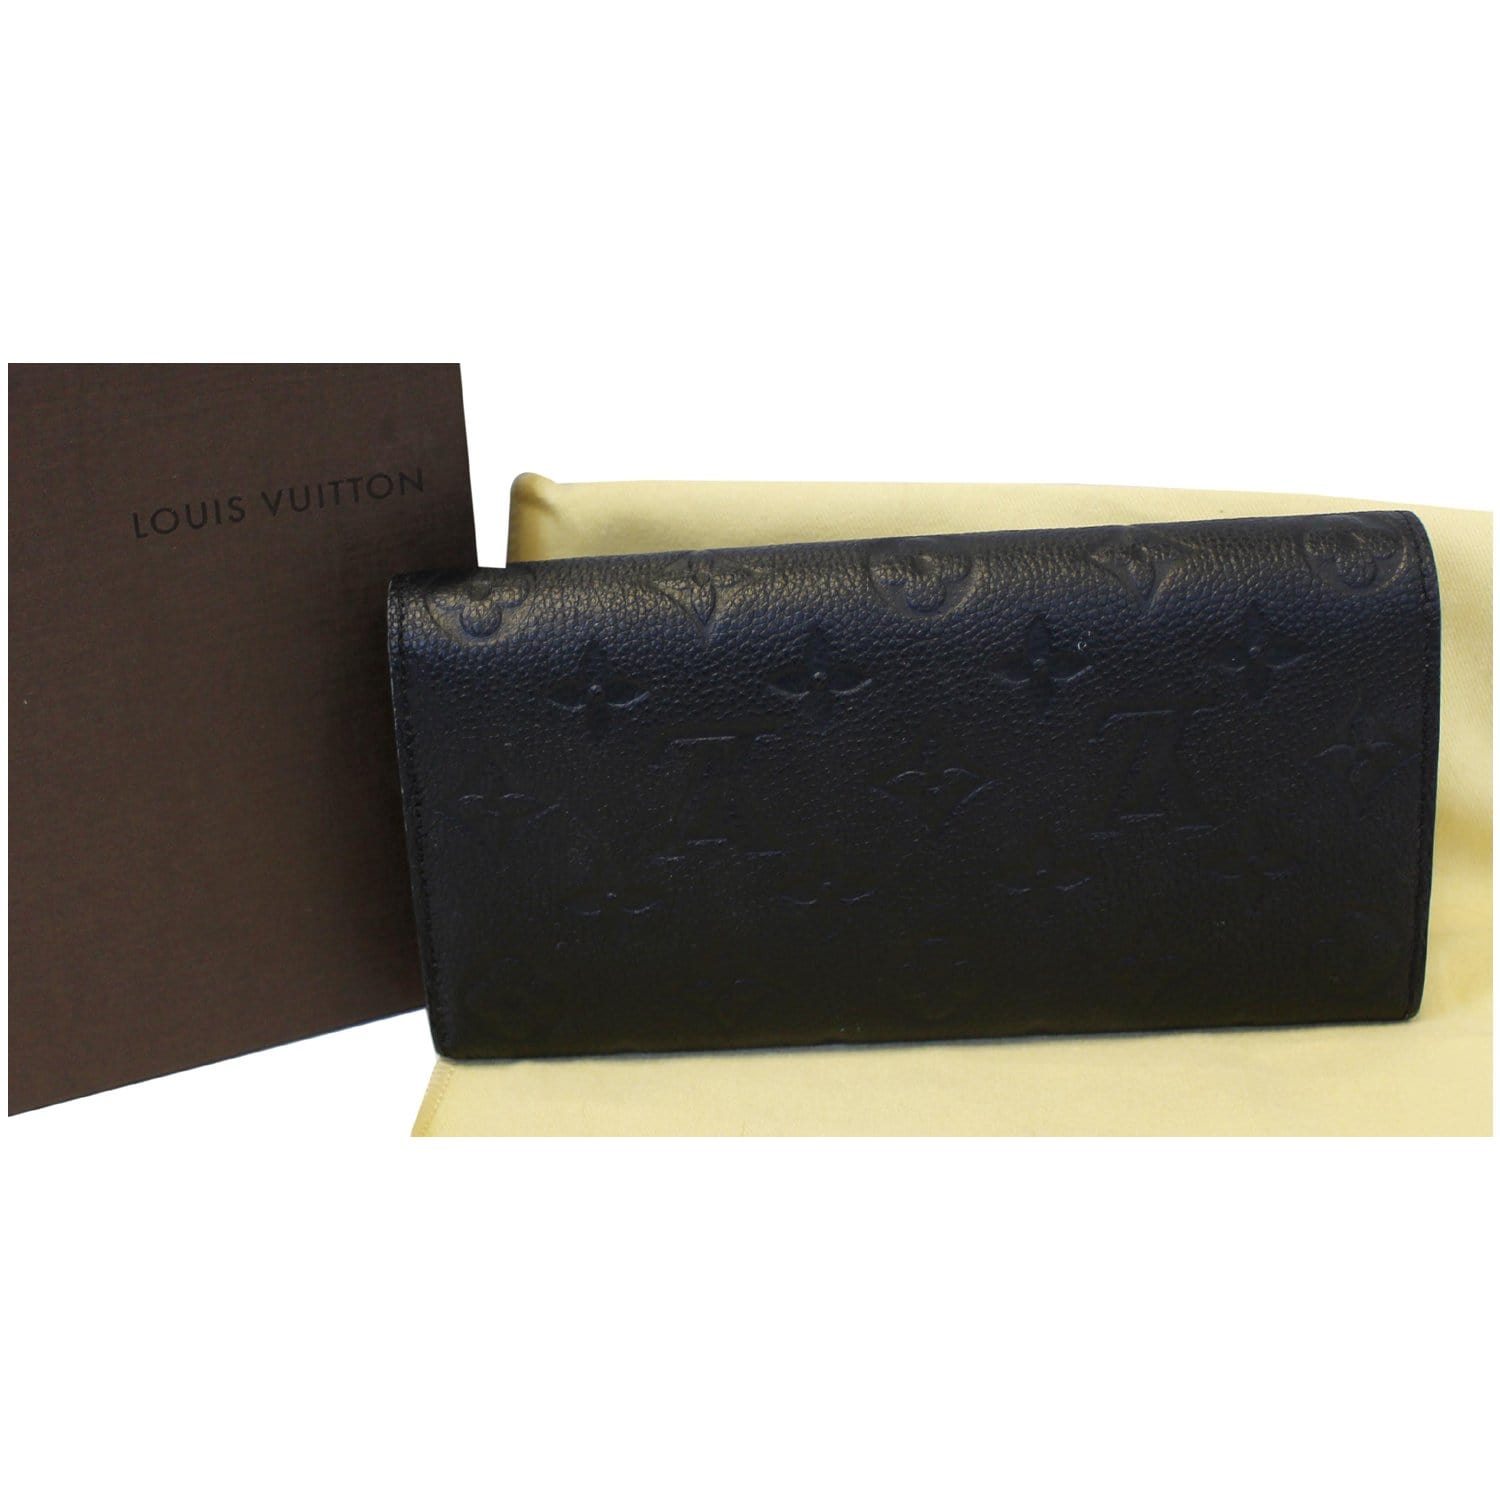 Louis Vuitton - Authenticated Emilie Wallet - Leather Black For Woman, Very Good condition